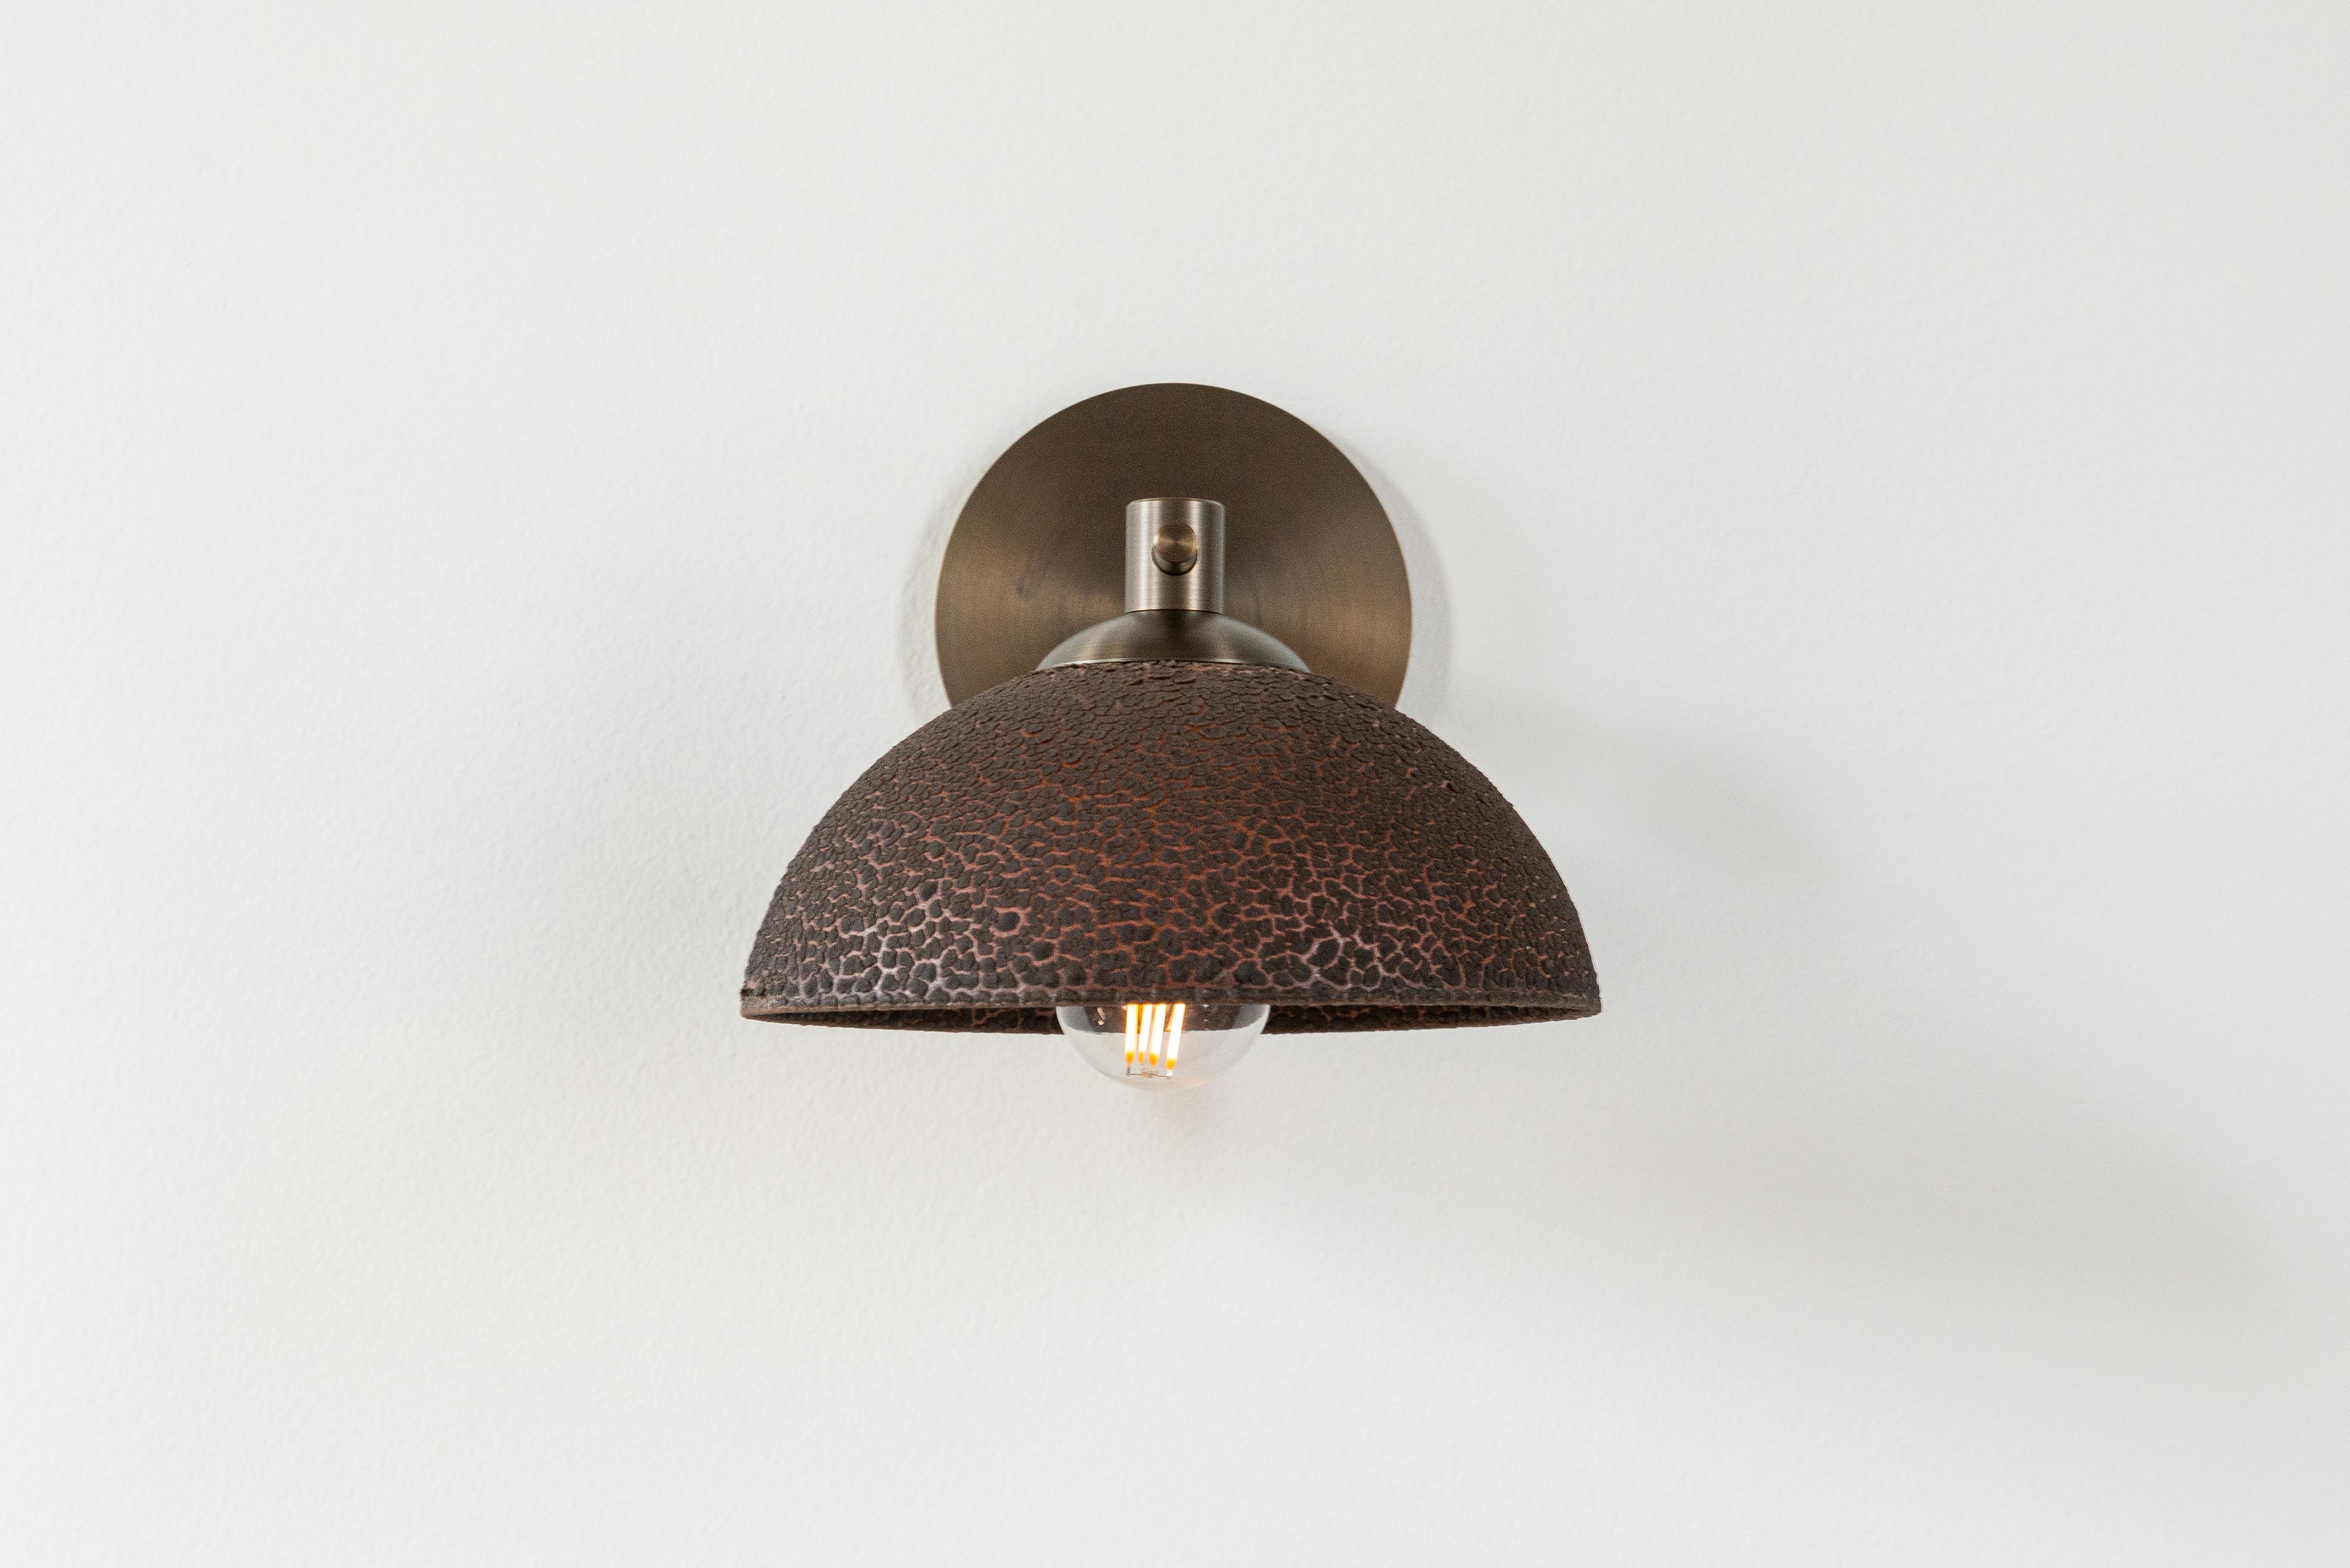 With a modern form and refined finishes, the stepping effect of the Dixon Sconce’s tubing mimics nature’s growth on flower stems. The reflector is hand-cast from terracotta and glazed with either a matte or textured lichen glaze, which you choose.